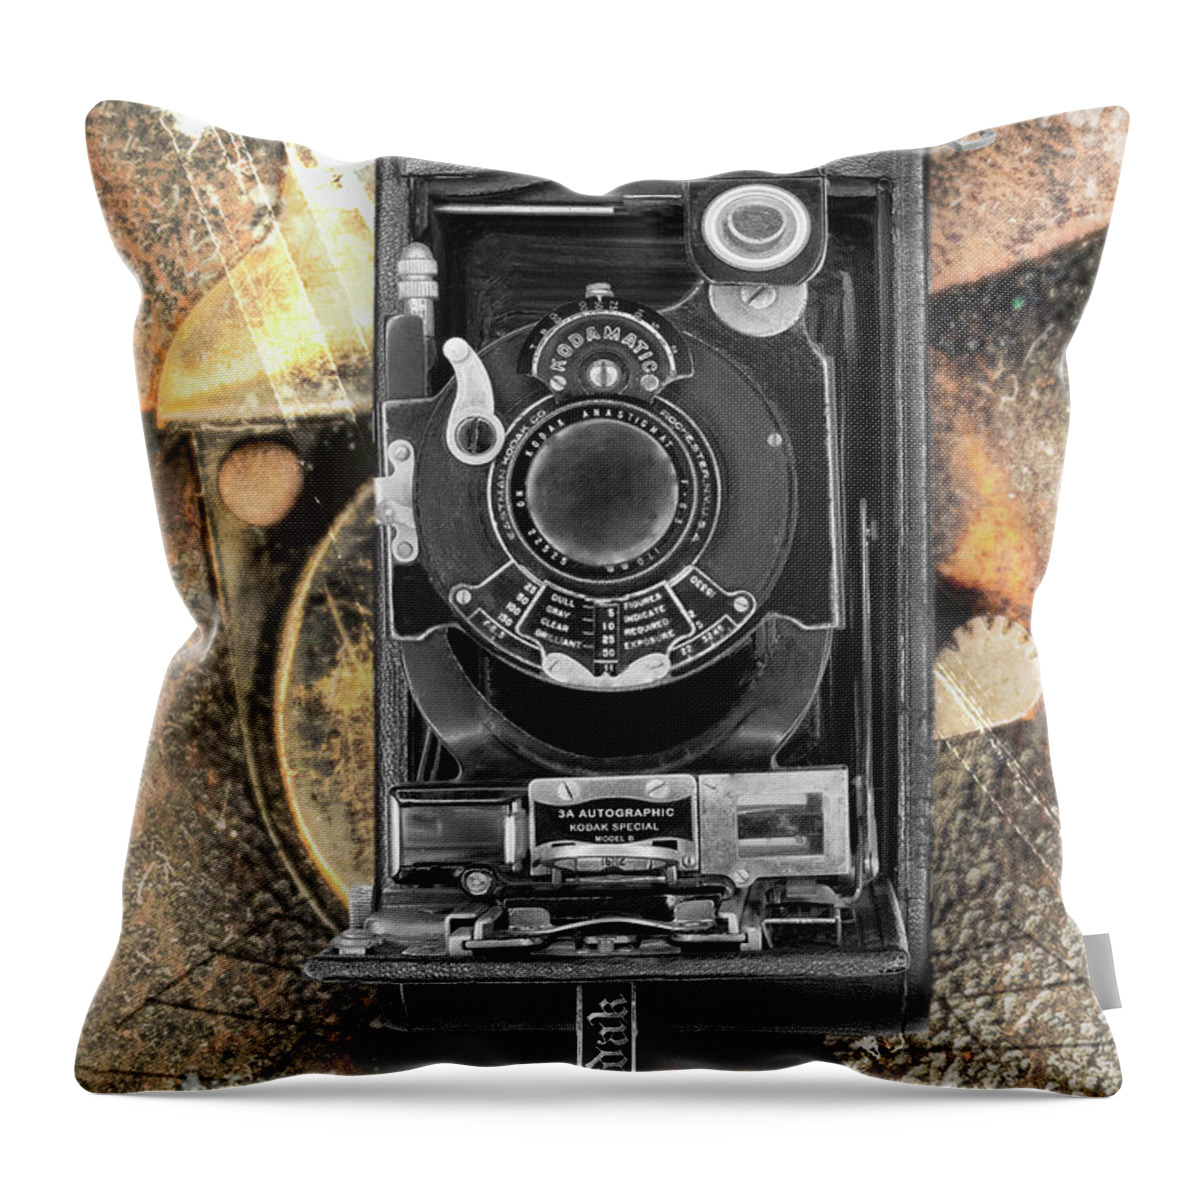 Argus Throw Pillow featuring the digital art Kodak 3a Autographic Special Model B by Anthony Ellis